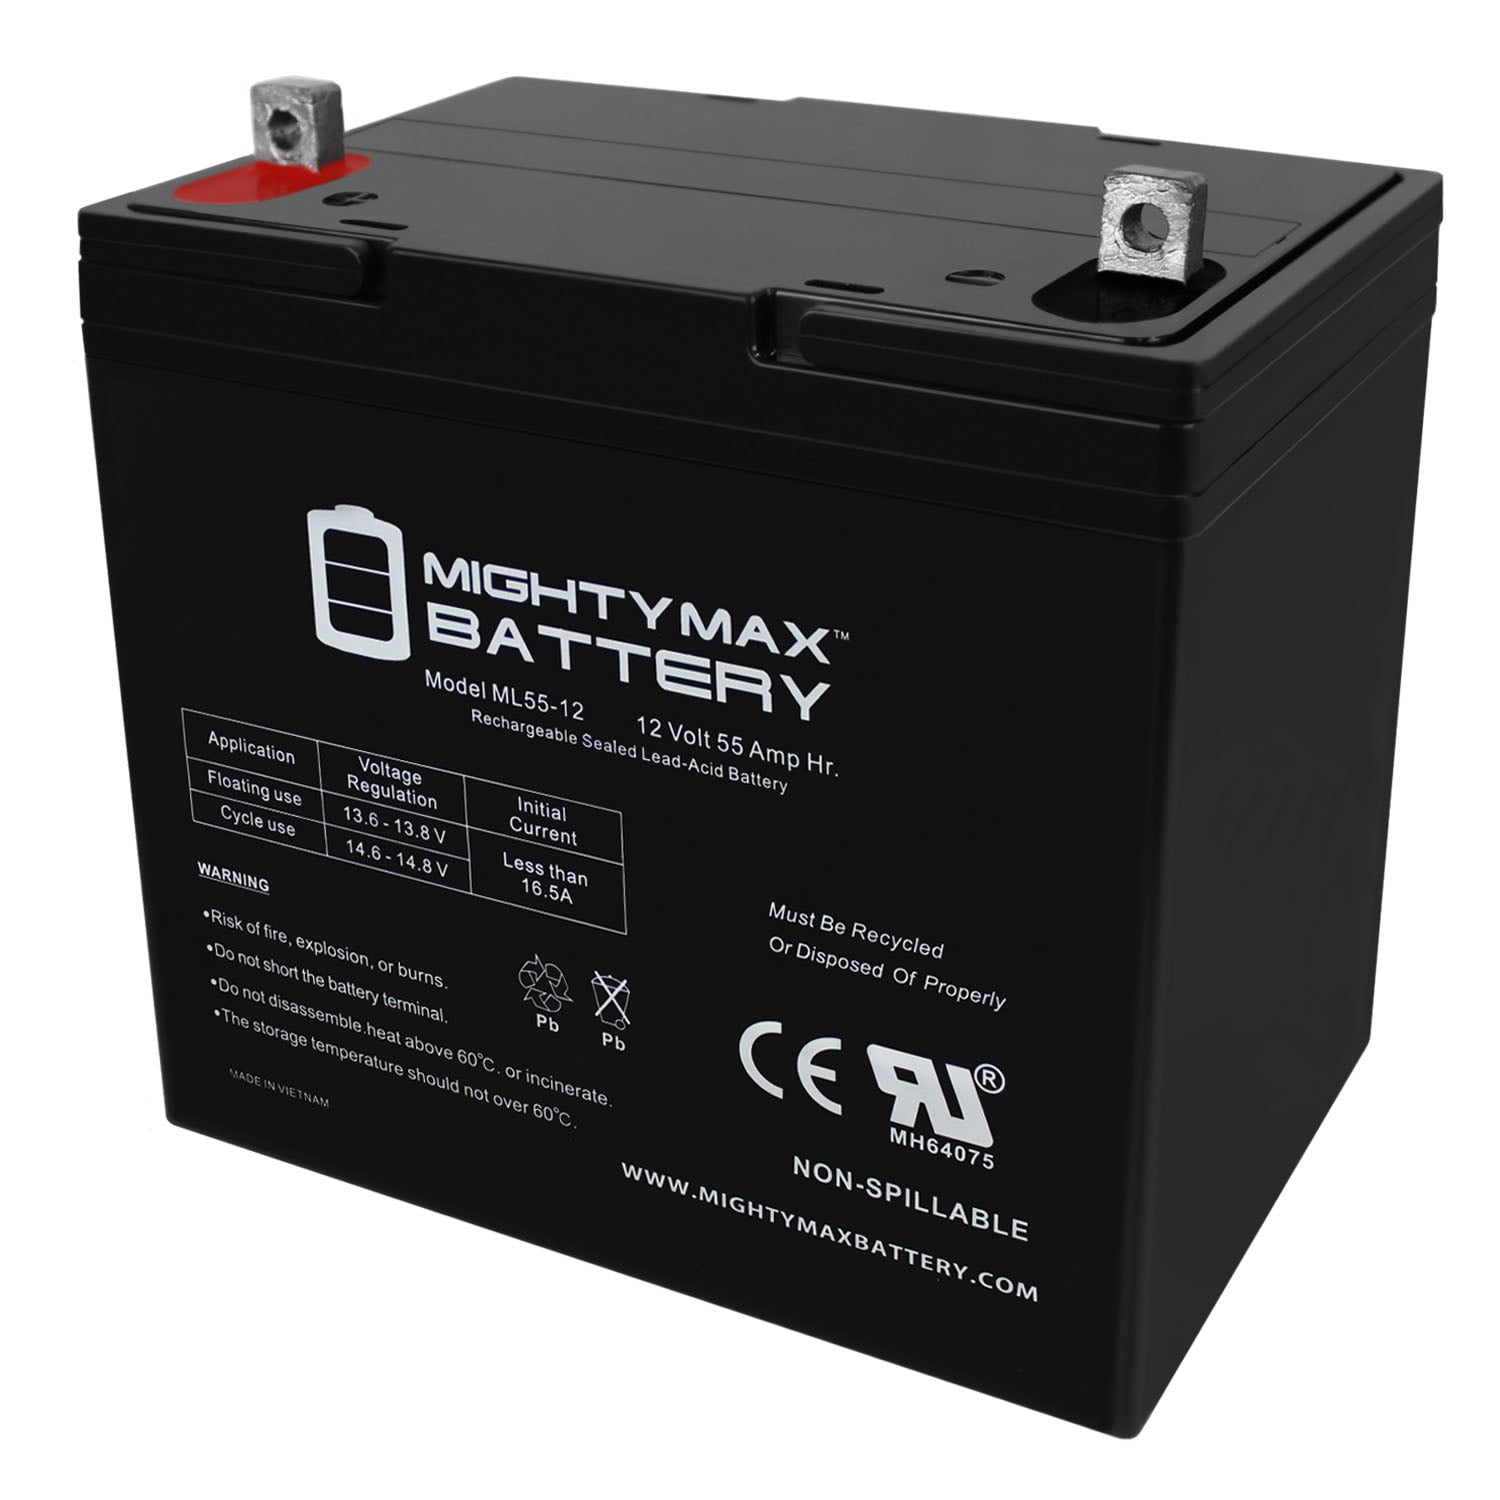 Mighty Max Battery 12V 50AH Replacement Battery for Minn Kota Endura C230 Brand Product 